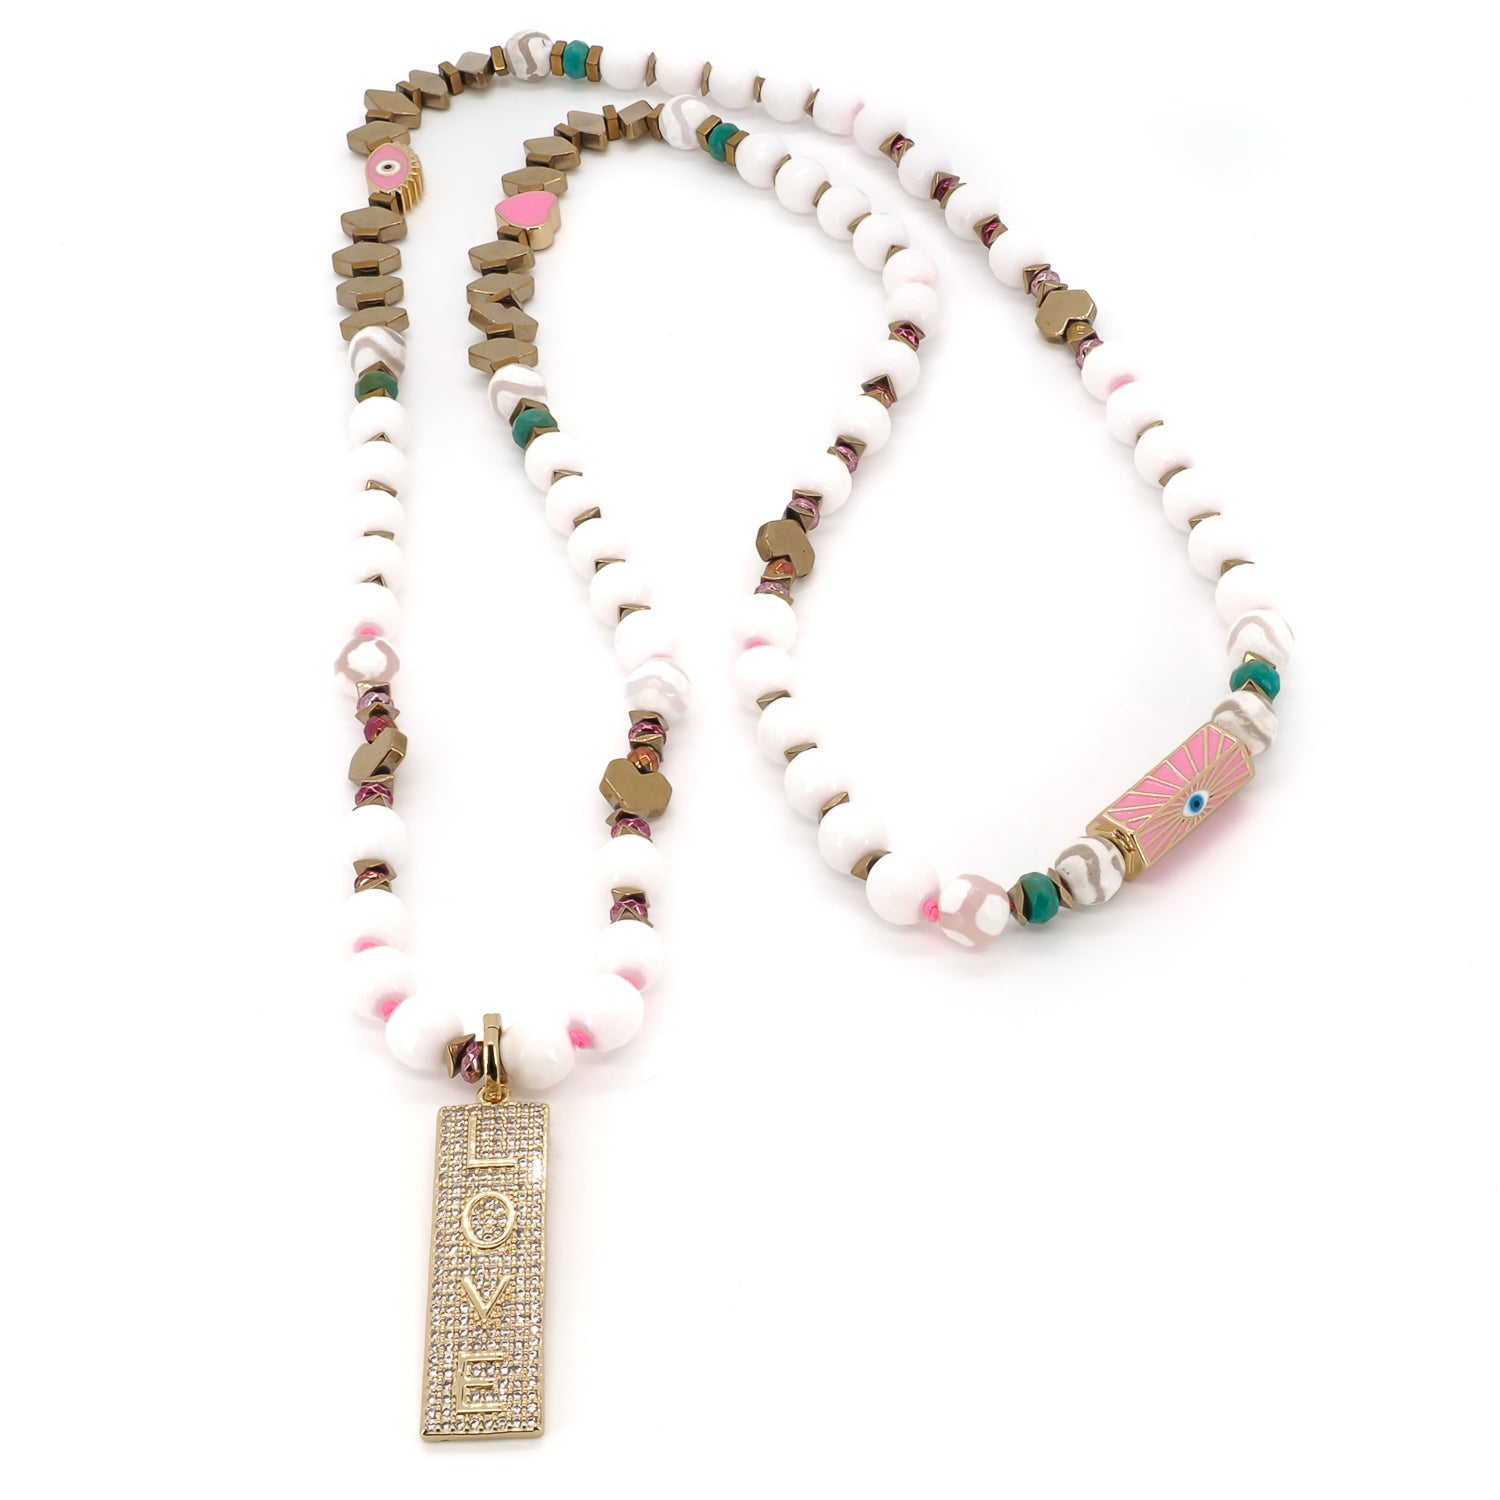 Power Of Love Necklace featuring a variety of beads, including white Nepal Agate, Jade, and turquoise stones, representing balance, serenity, and protection.